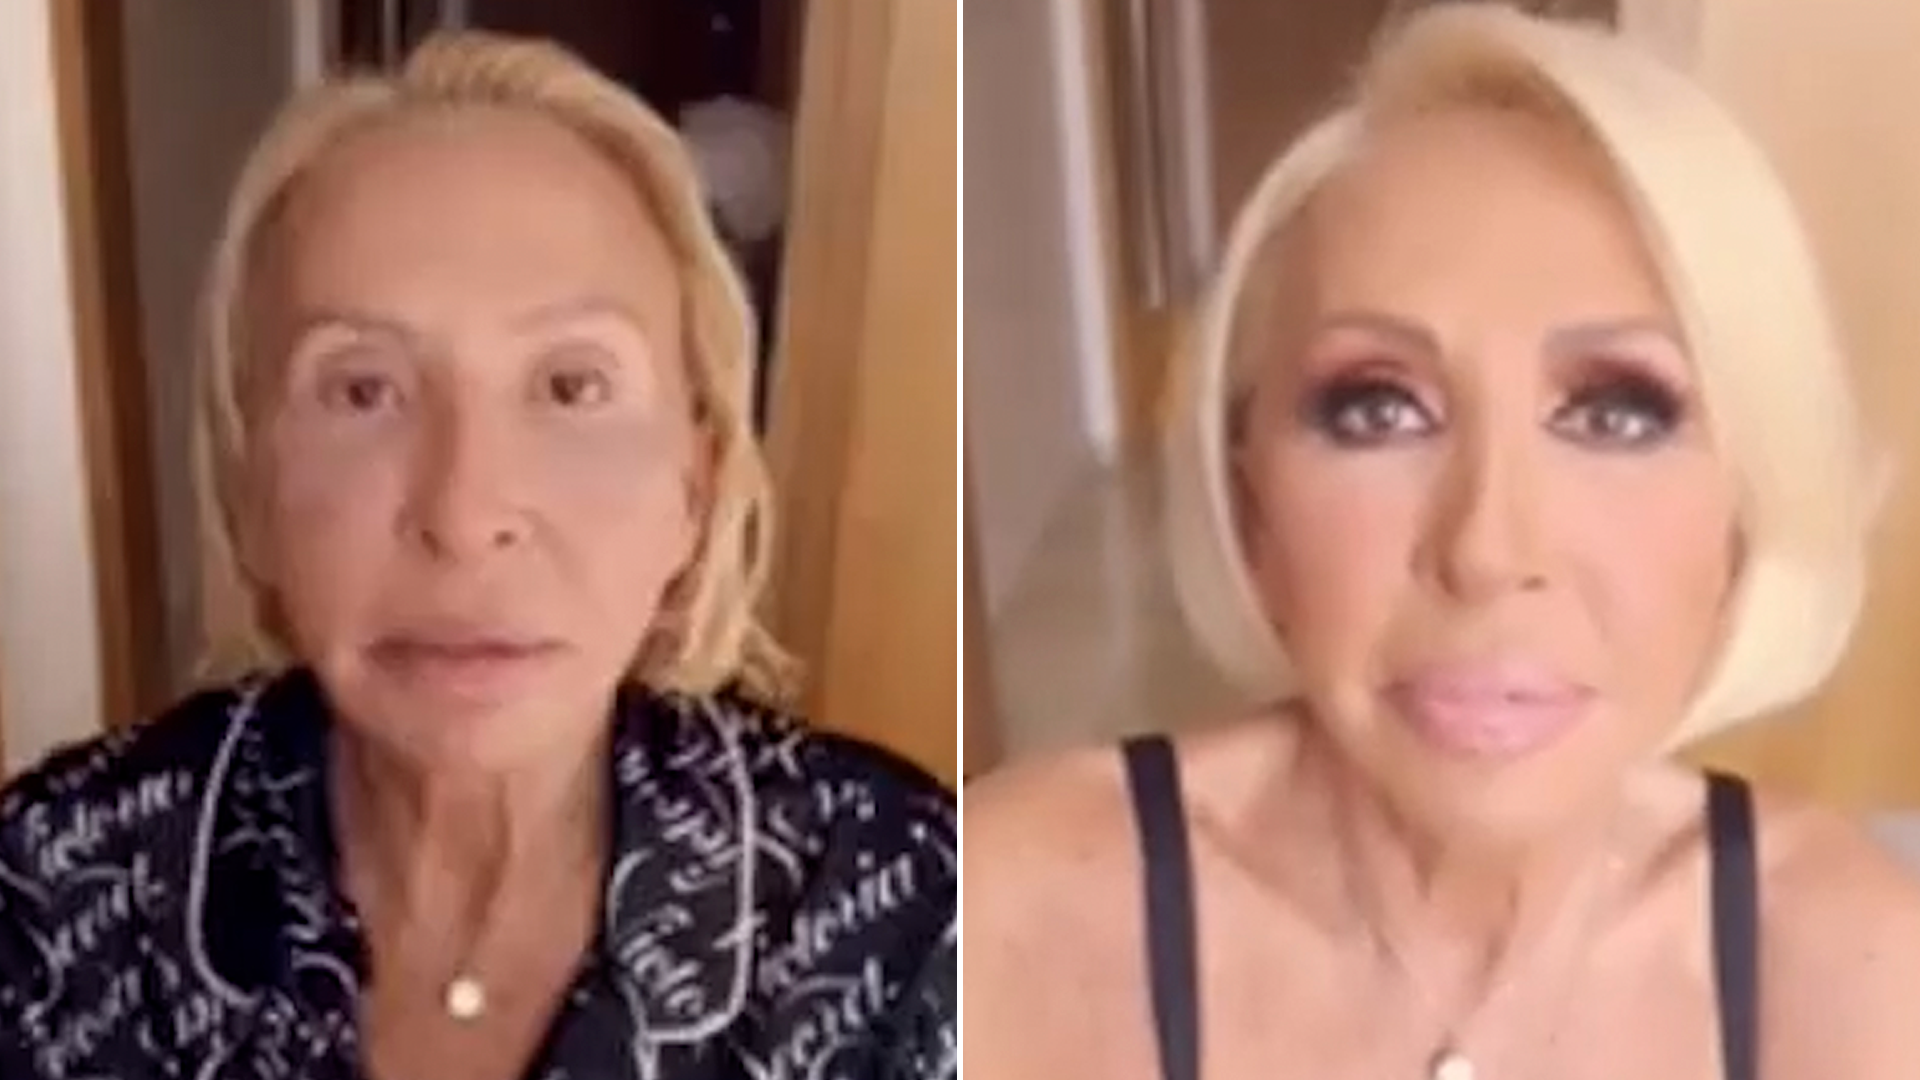 Laura Bozzo joins The House of Celebrities